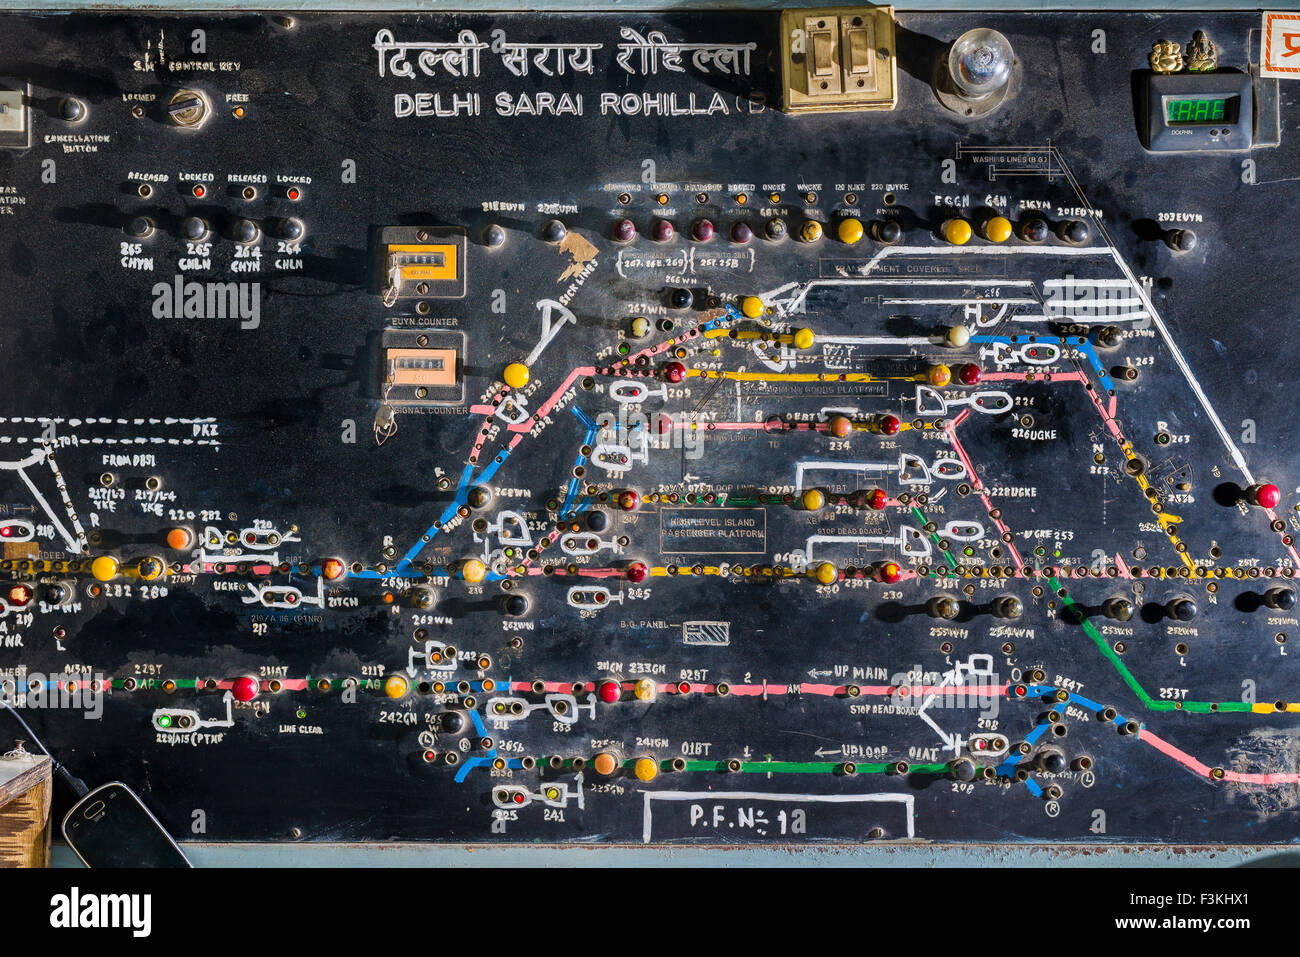 The board for coordinating the trains arriving and leaving the Railway Station Delhi Sarai Rohilla by hand Stock Photo